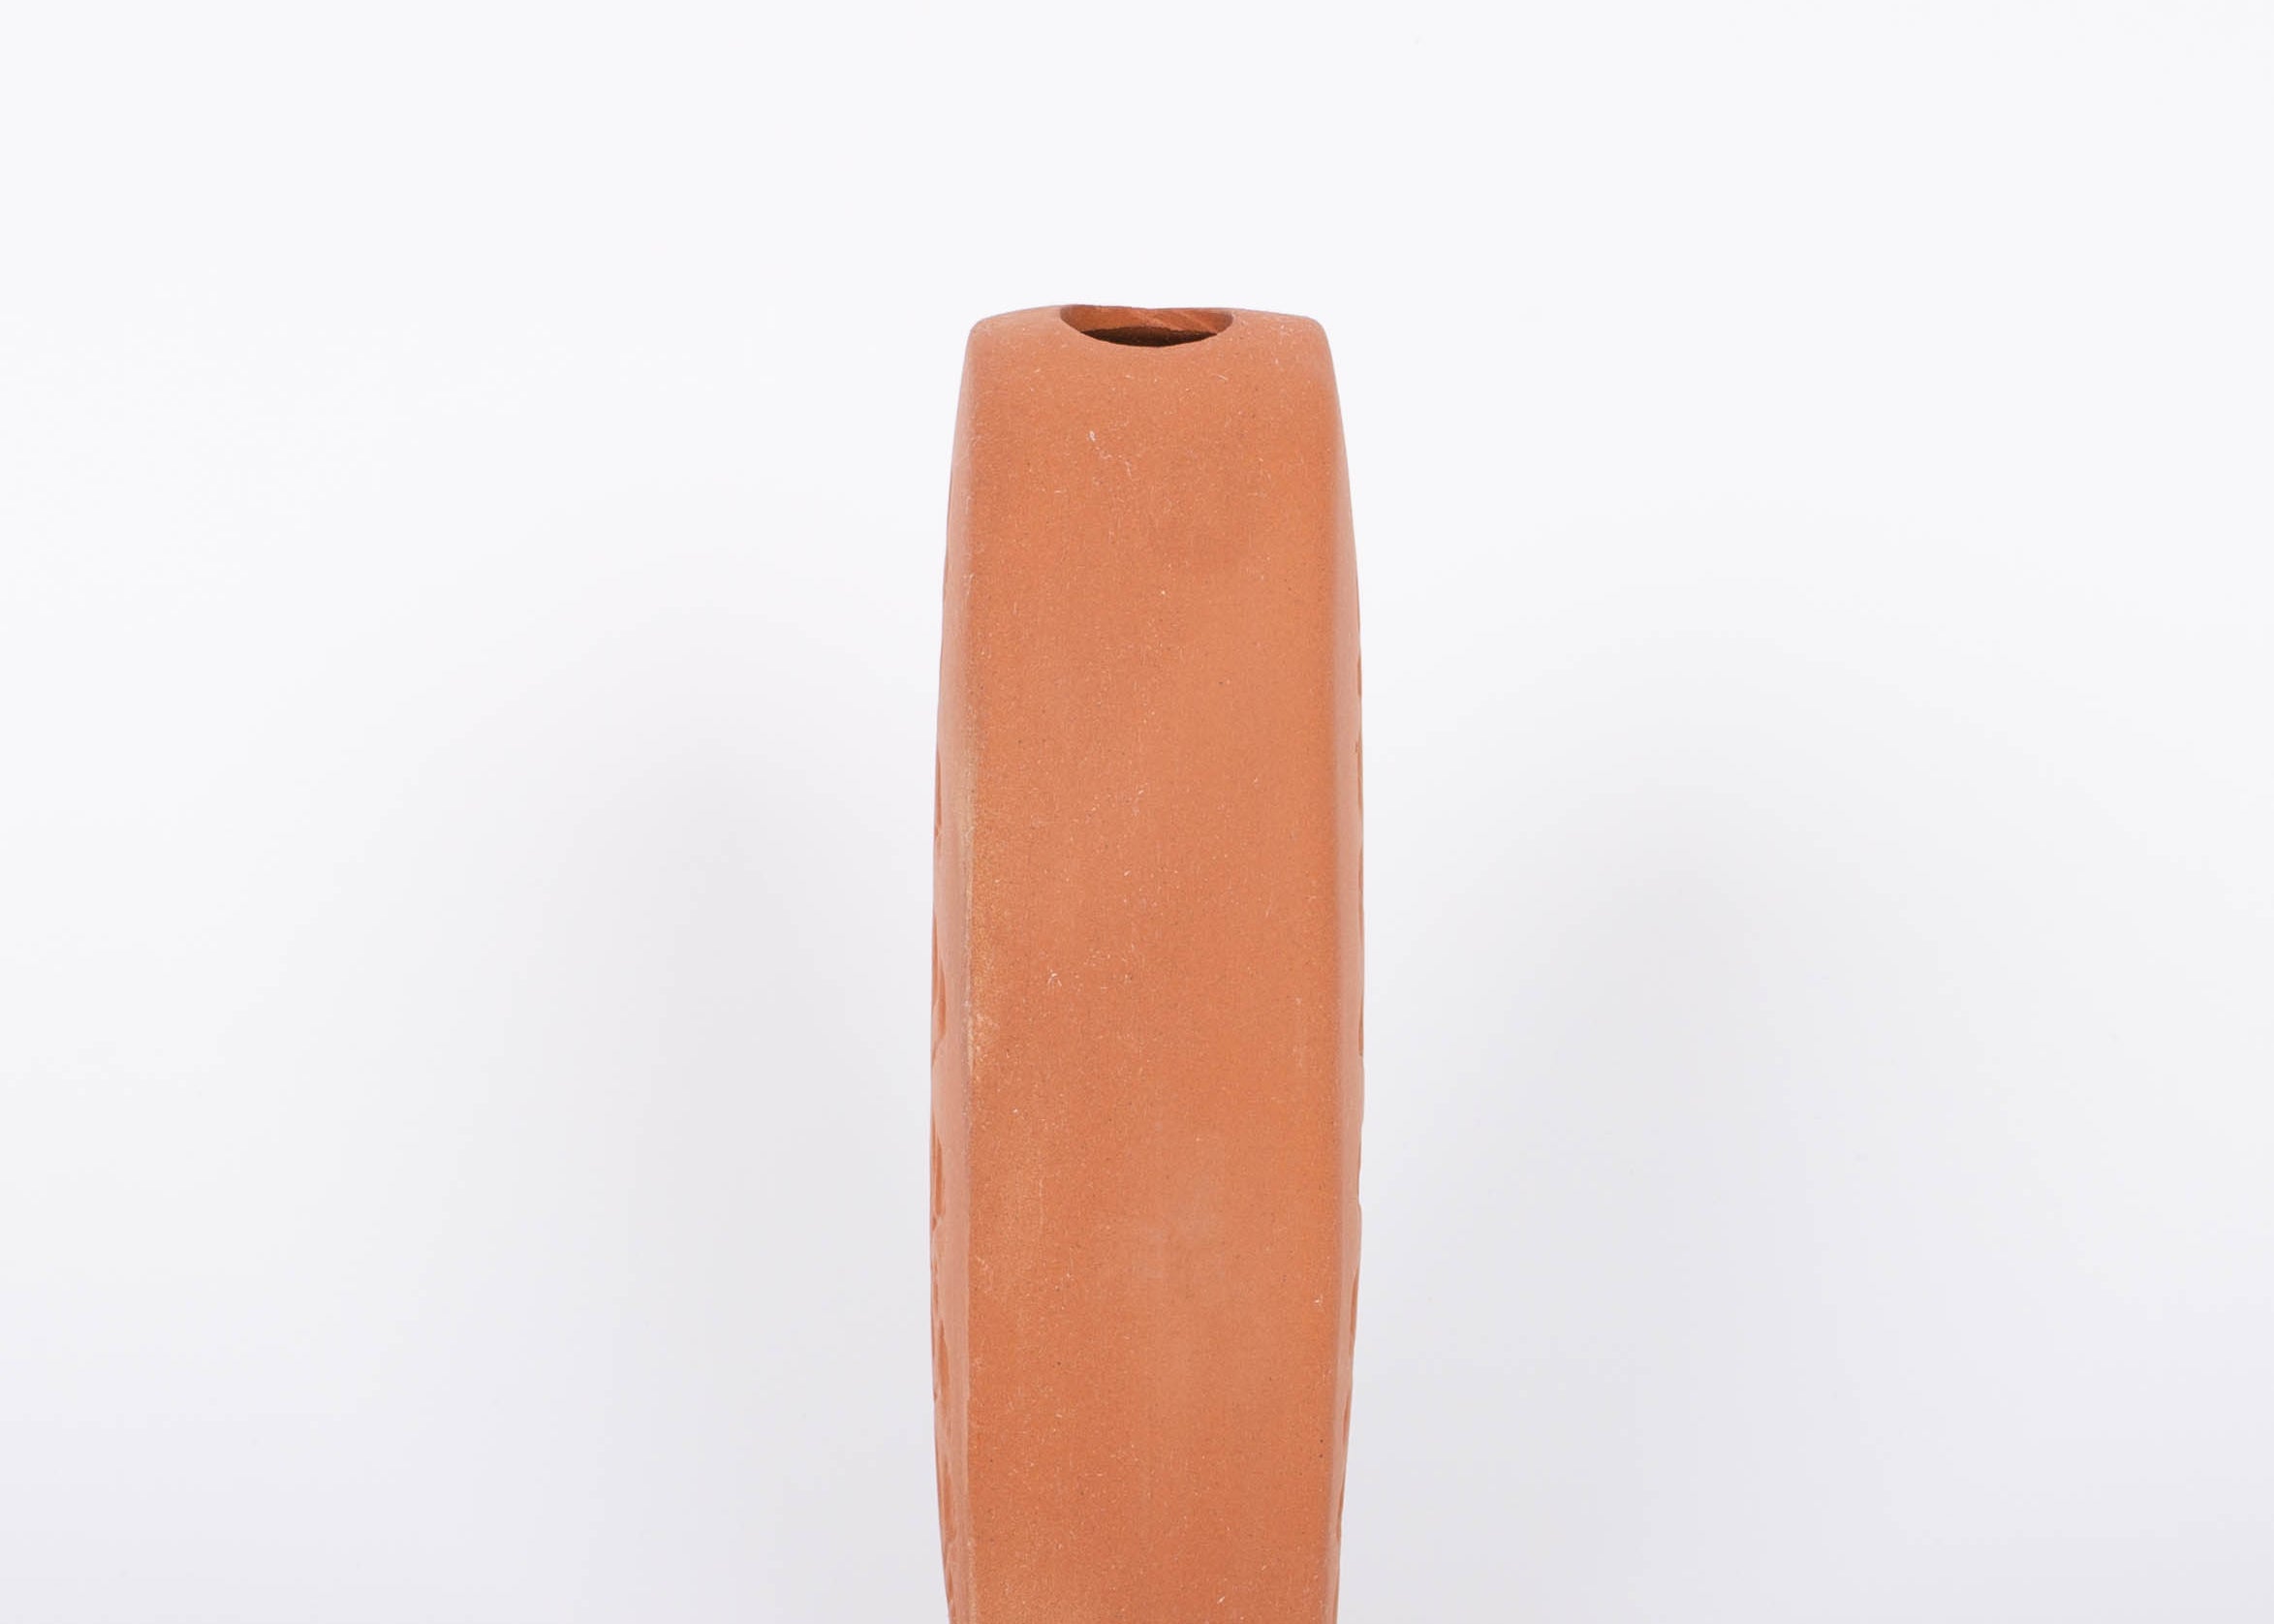 Tall oval Poppy Budvase in terracotta geometric silhouette with imprint of live plant. Side view. White background.